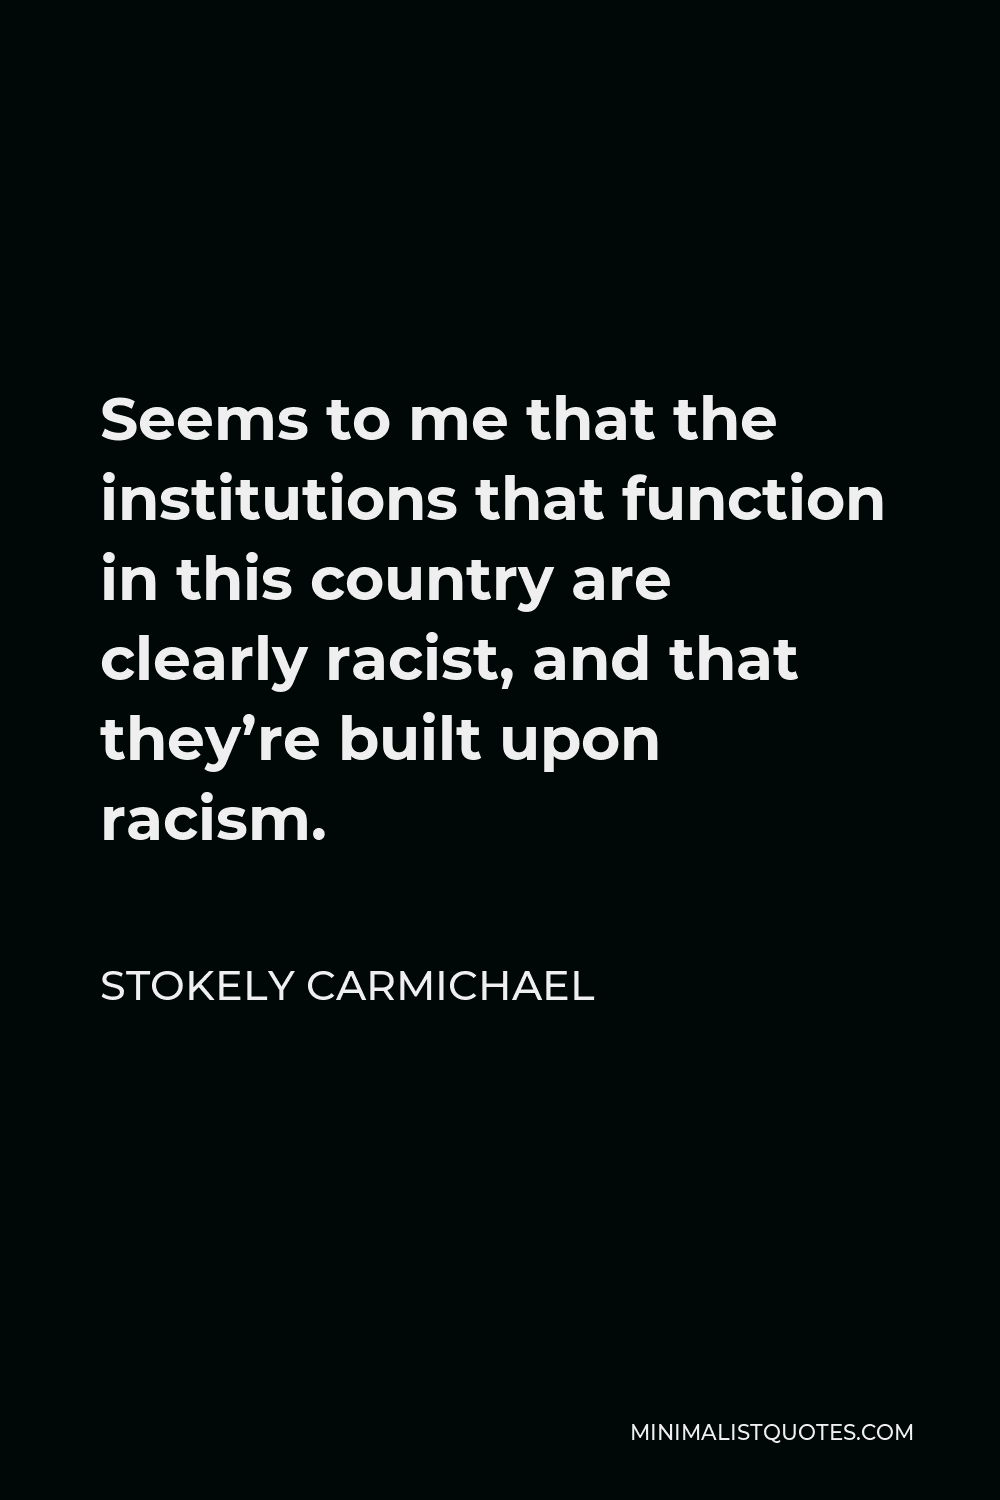 Stokely Carmichael Quote - Seems to me that the institutions that function in this country are clearly racist, and that they’re built upon racism.